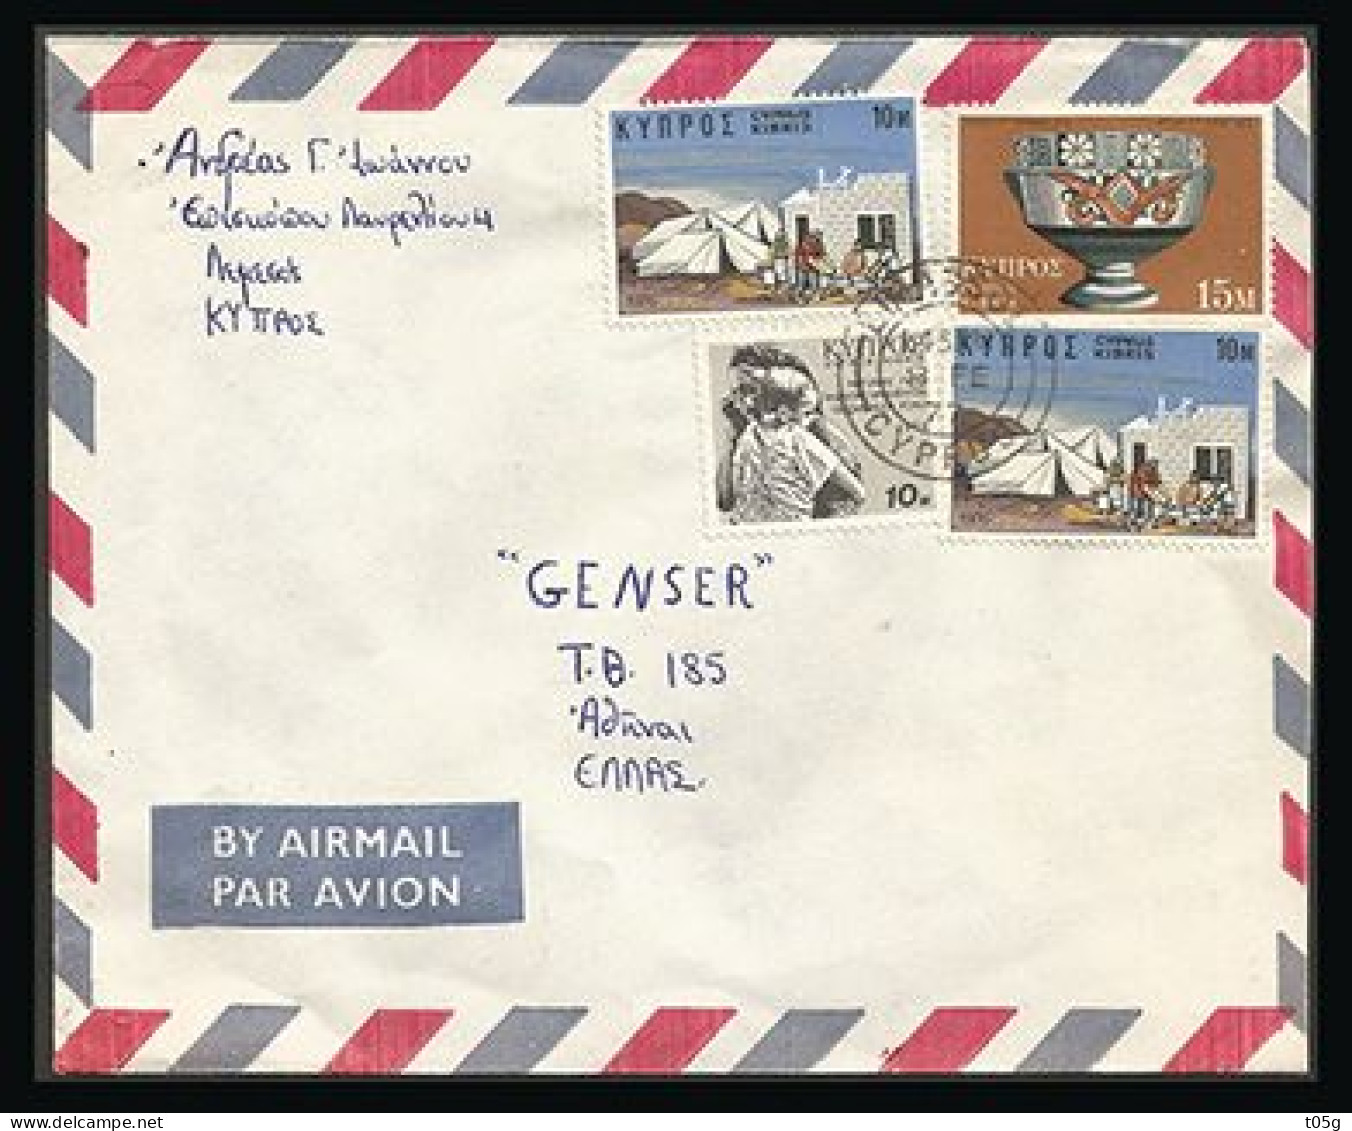 CYPRUS- GREECE- GRECE- HELLAS 1977:  letter From Limassol To Athens - Lettres & Documents